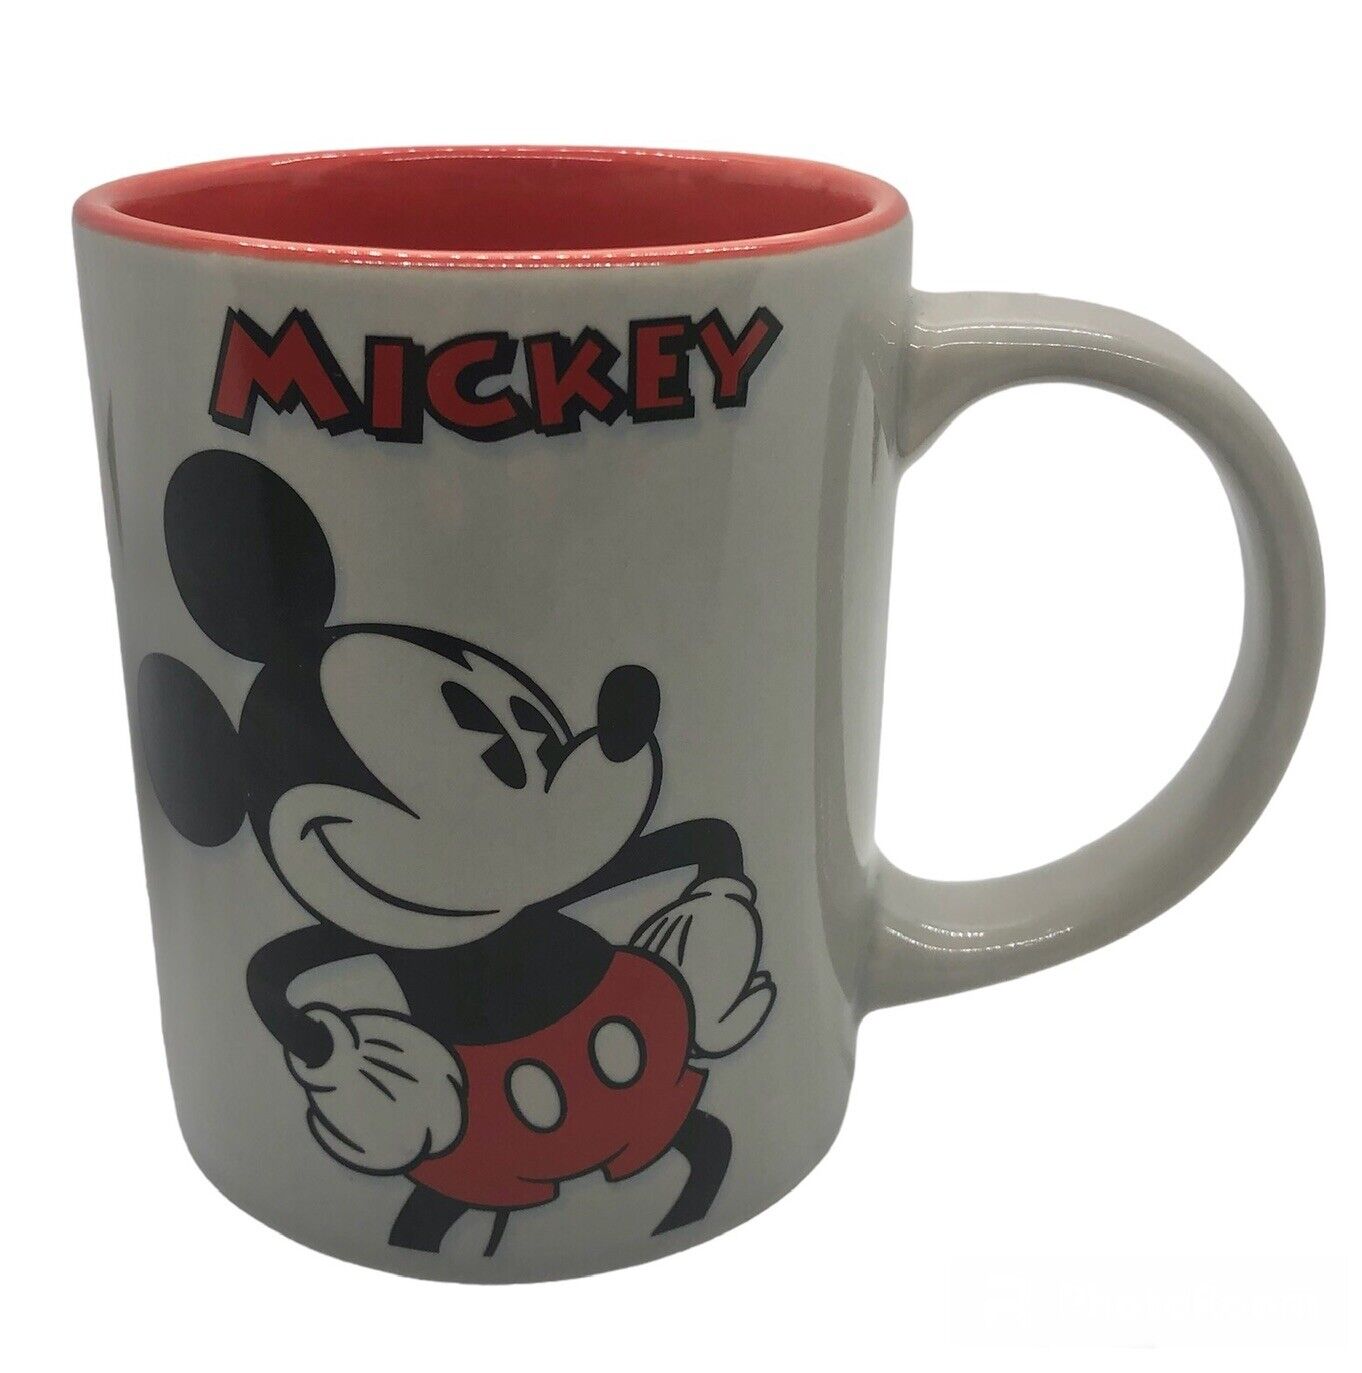 Disney JERRY LEIGH Vintage MICKEY MOUSE Coffee MUG Cup LARGE